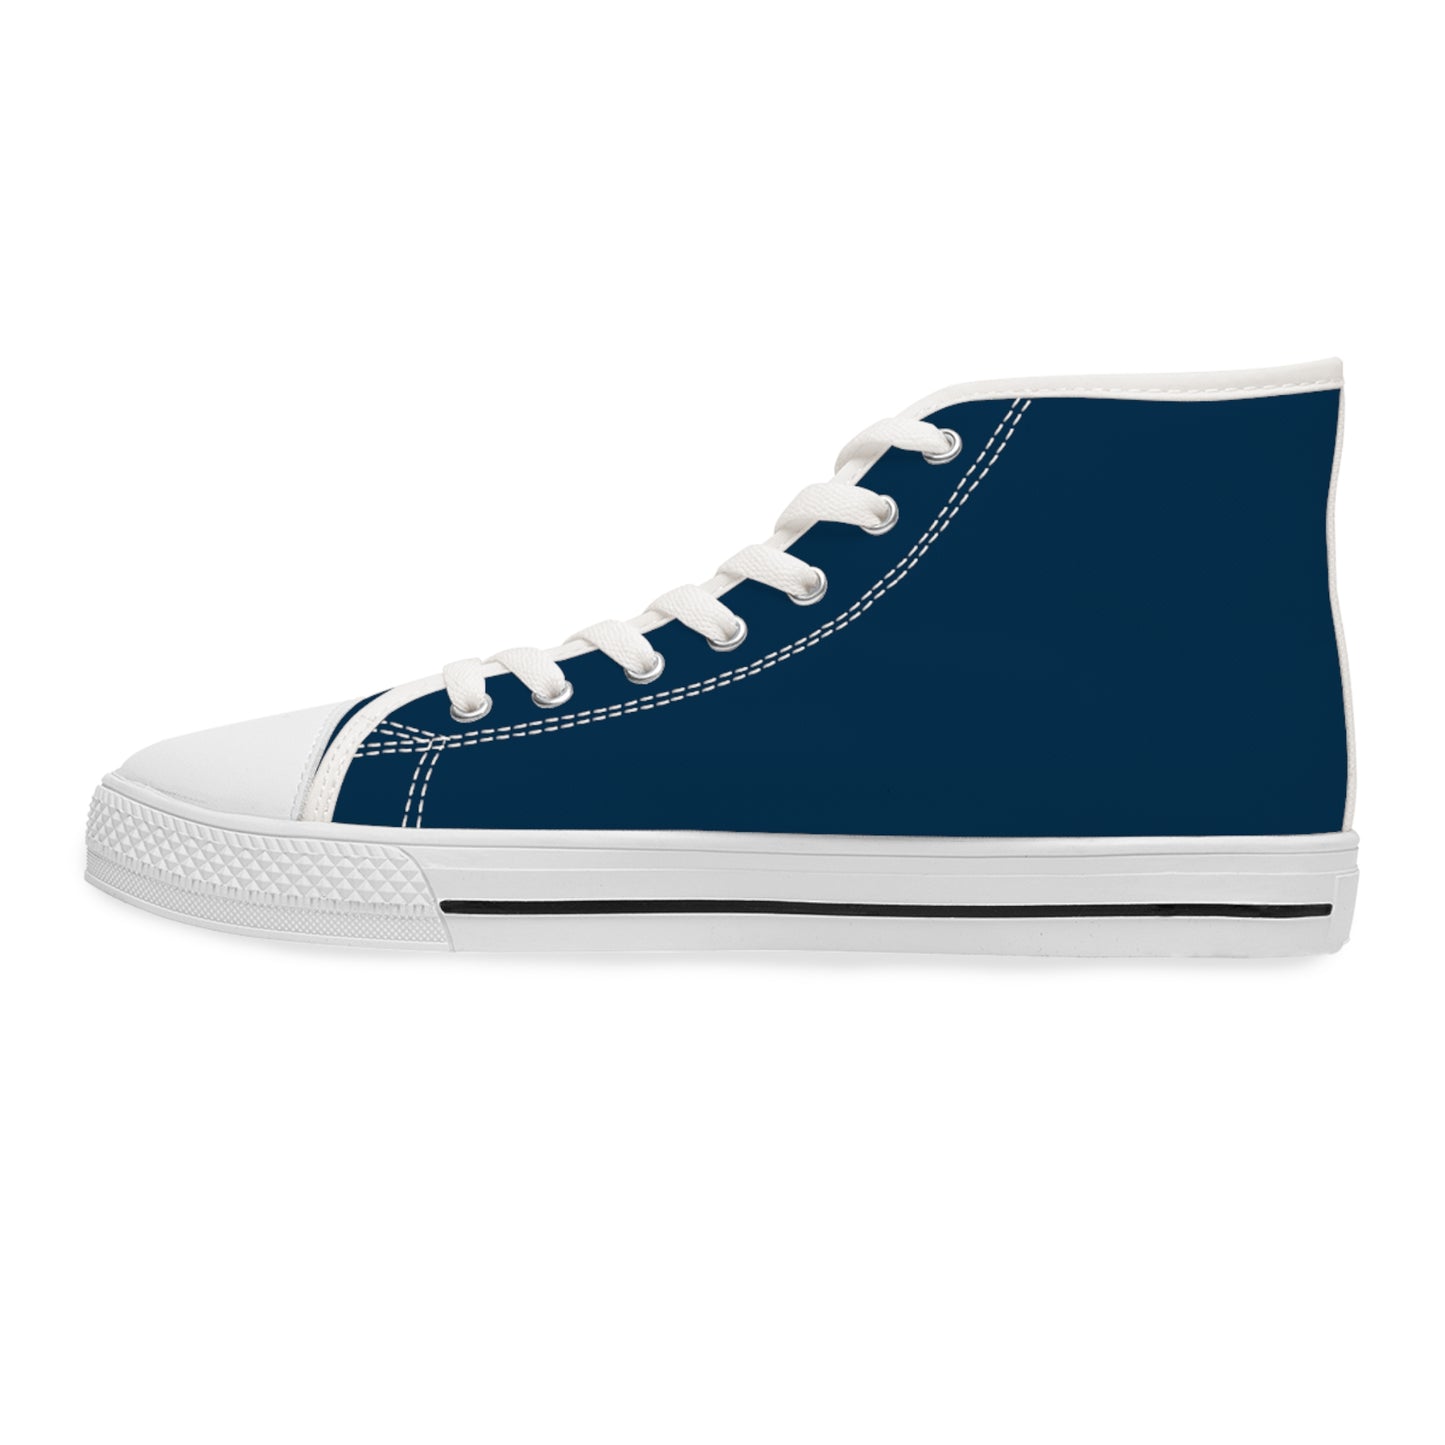 Women's Canvas High Top Solid Color Sneakers - Ink Blue US 12 White sole